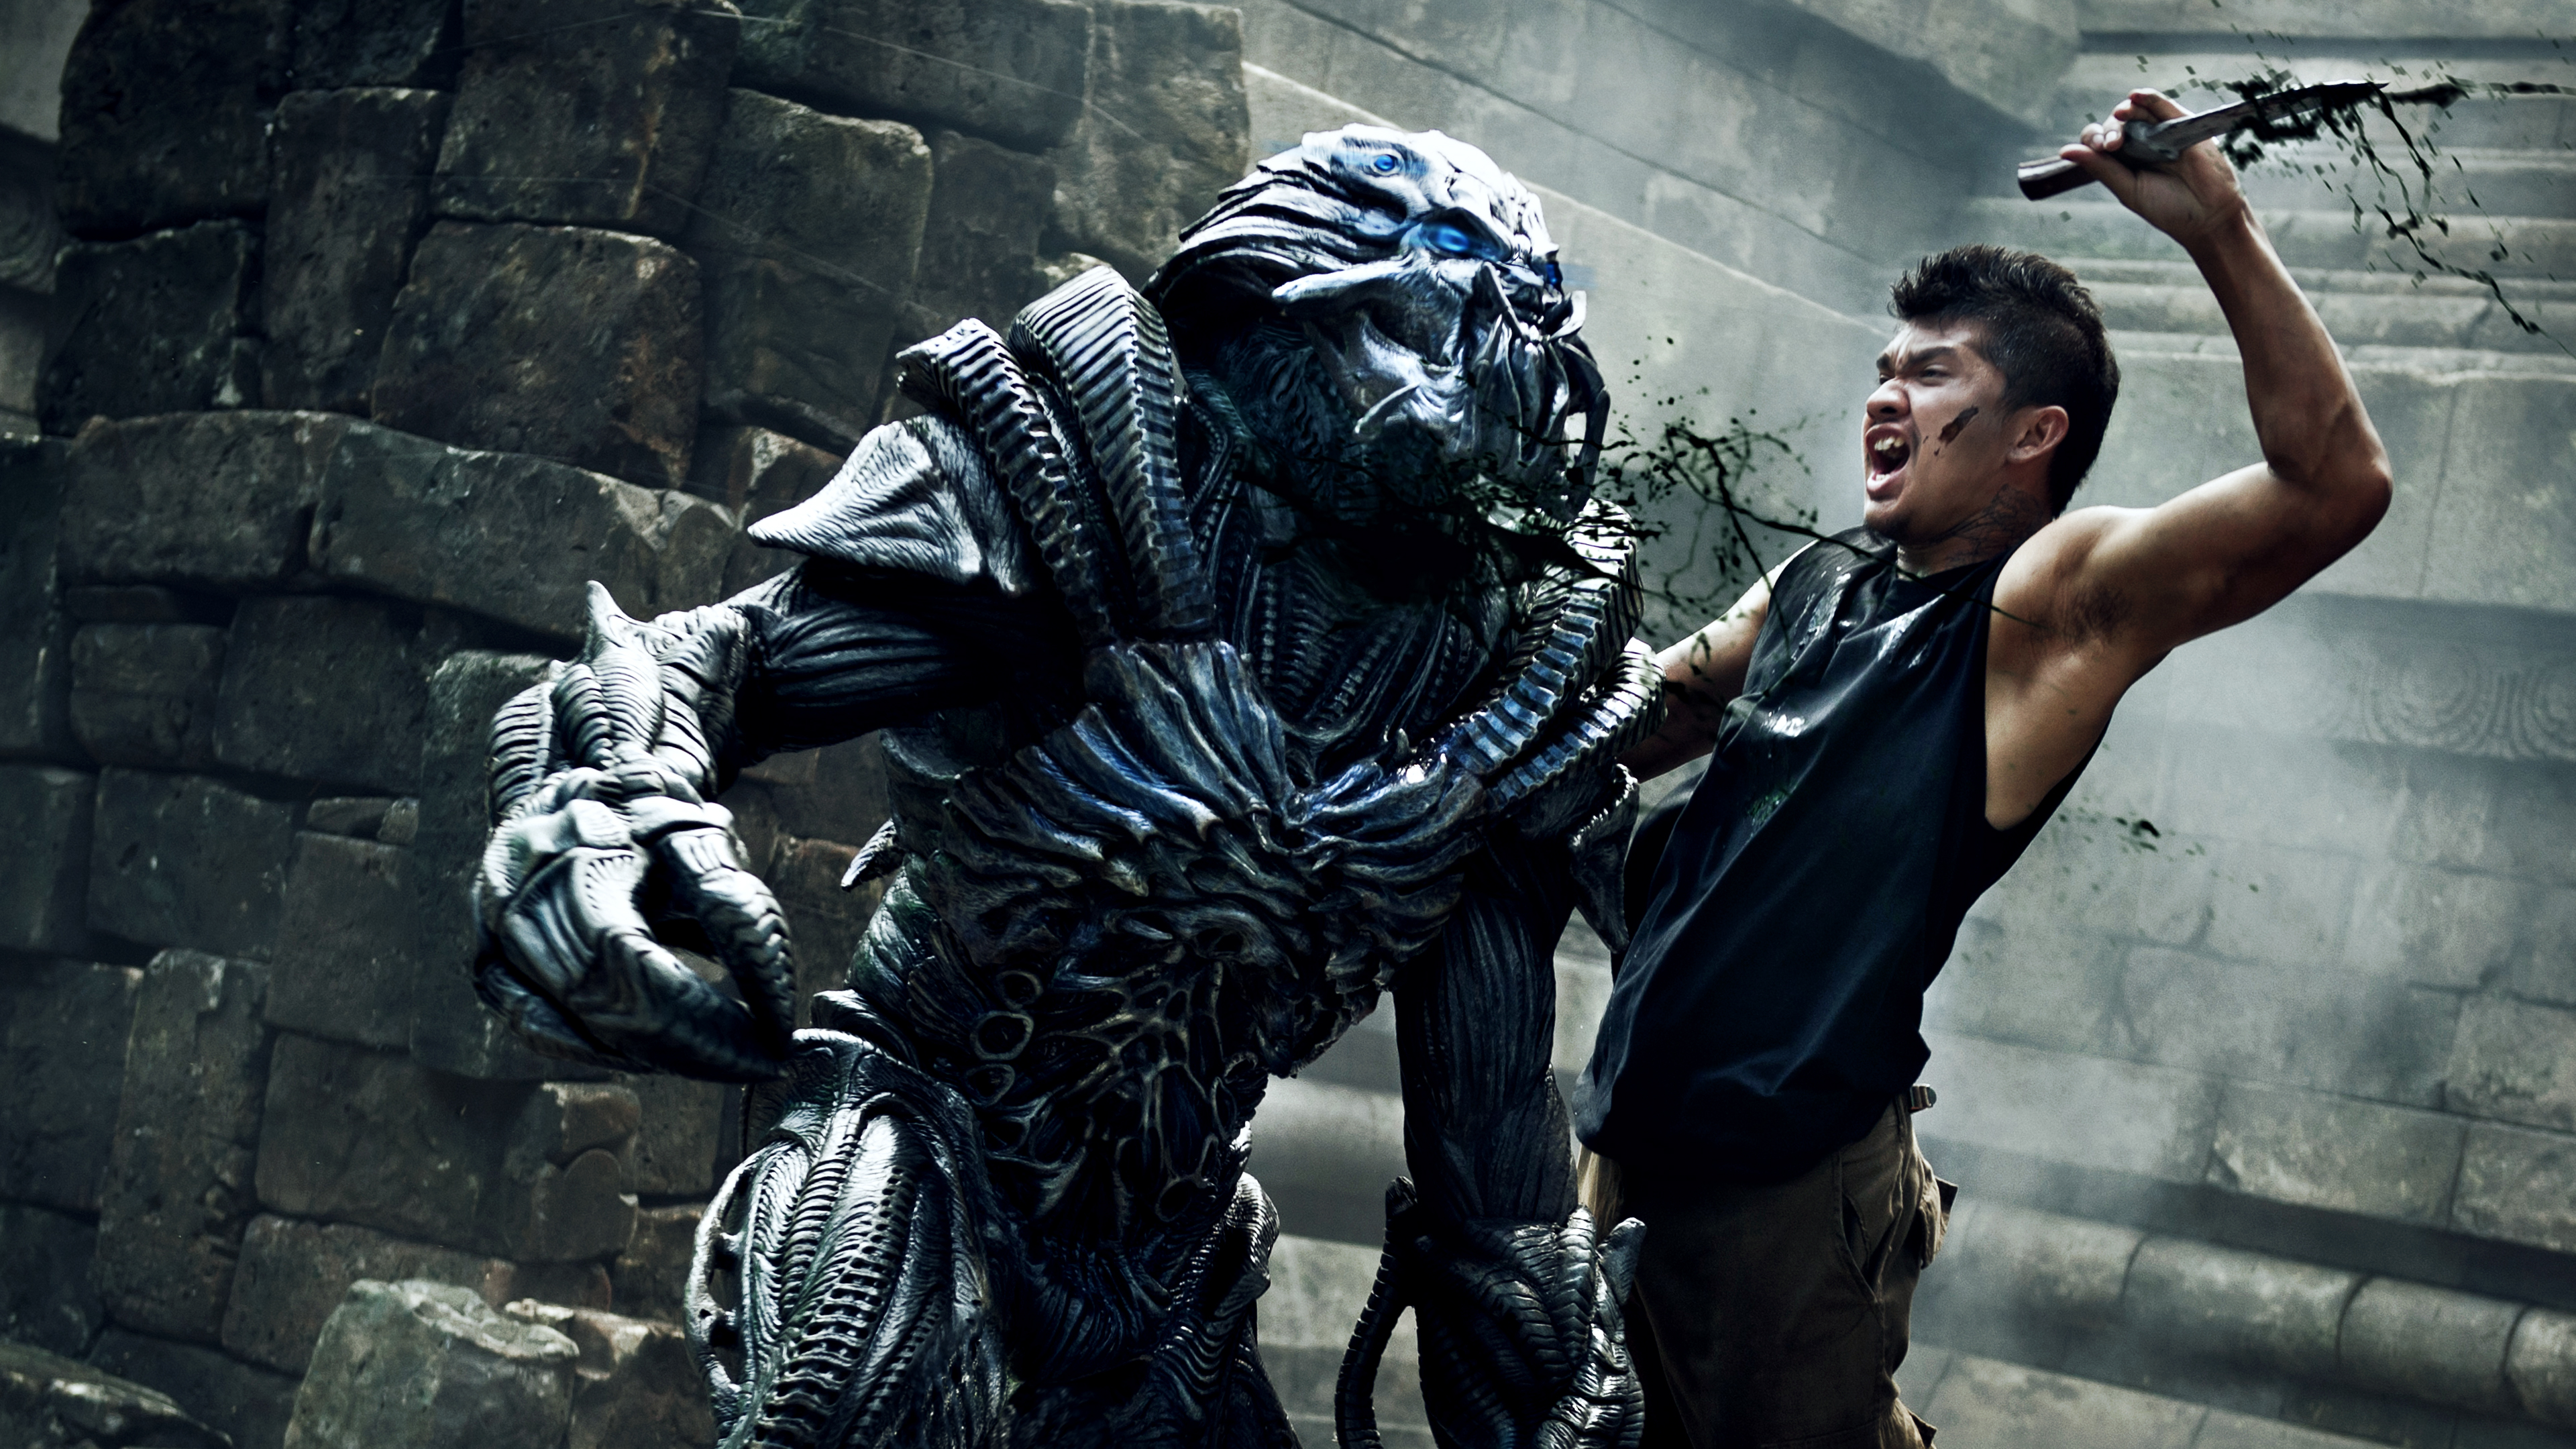 Beyond Skyline' Images Shred the Alien Invaders - Bloody Disgusting